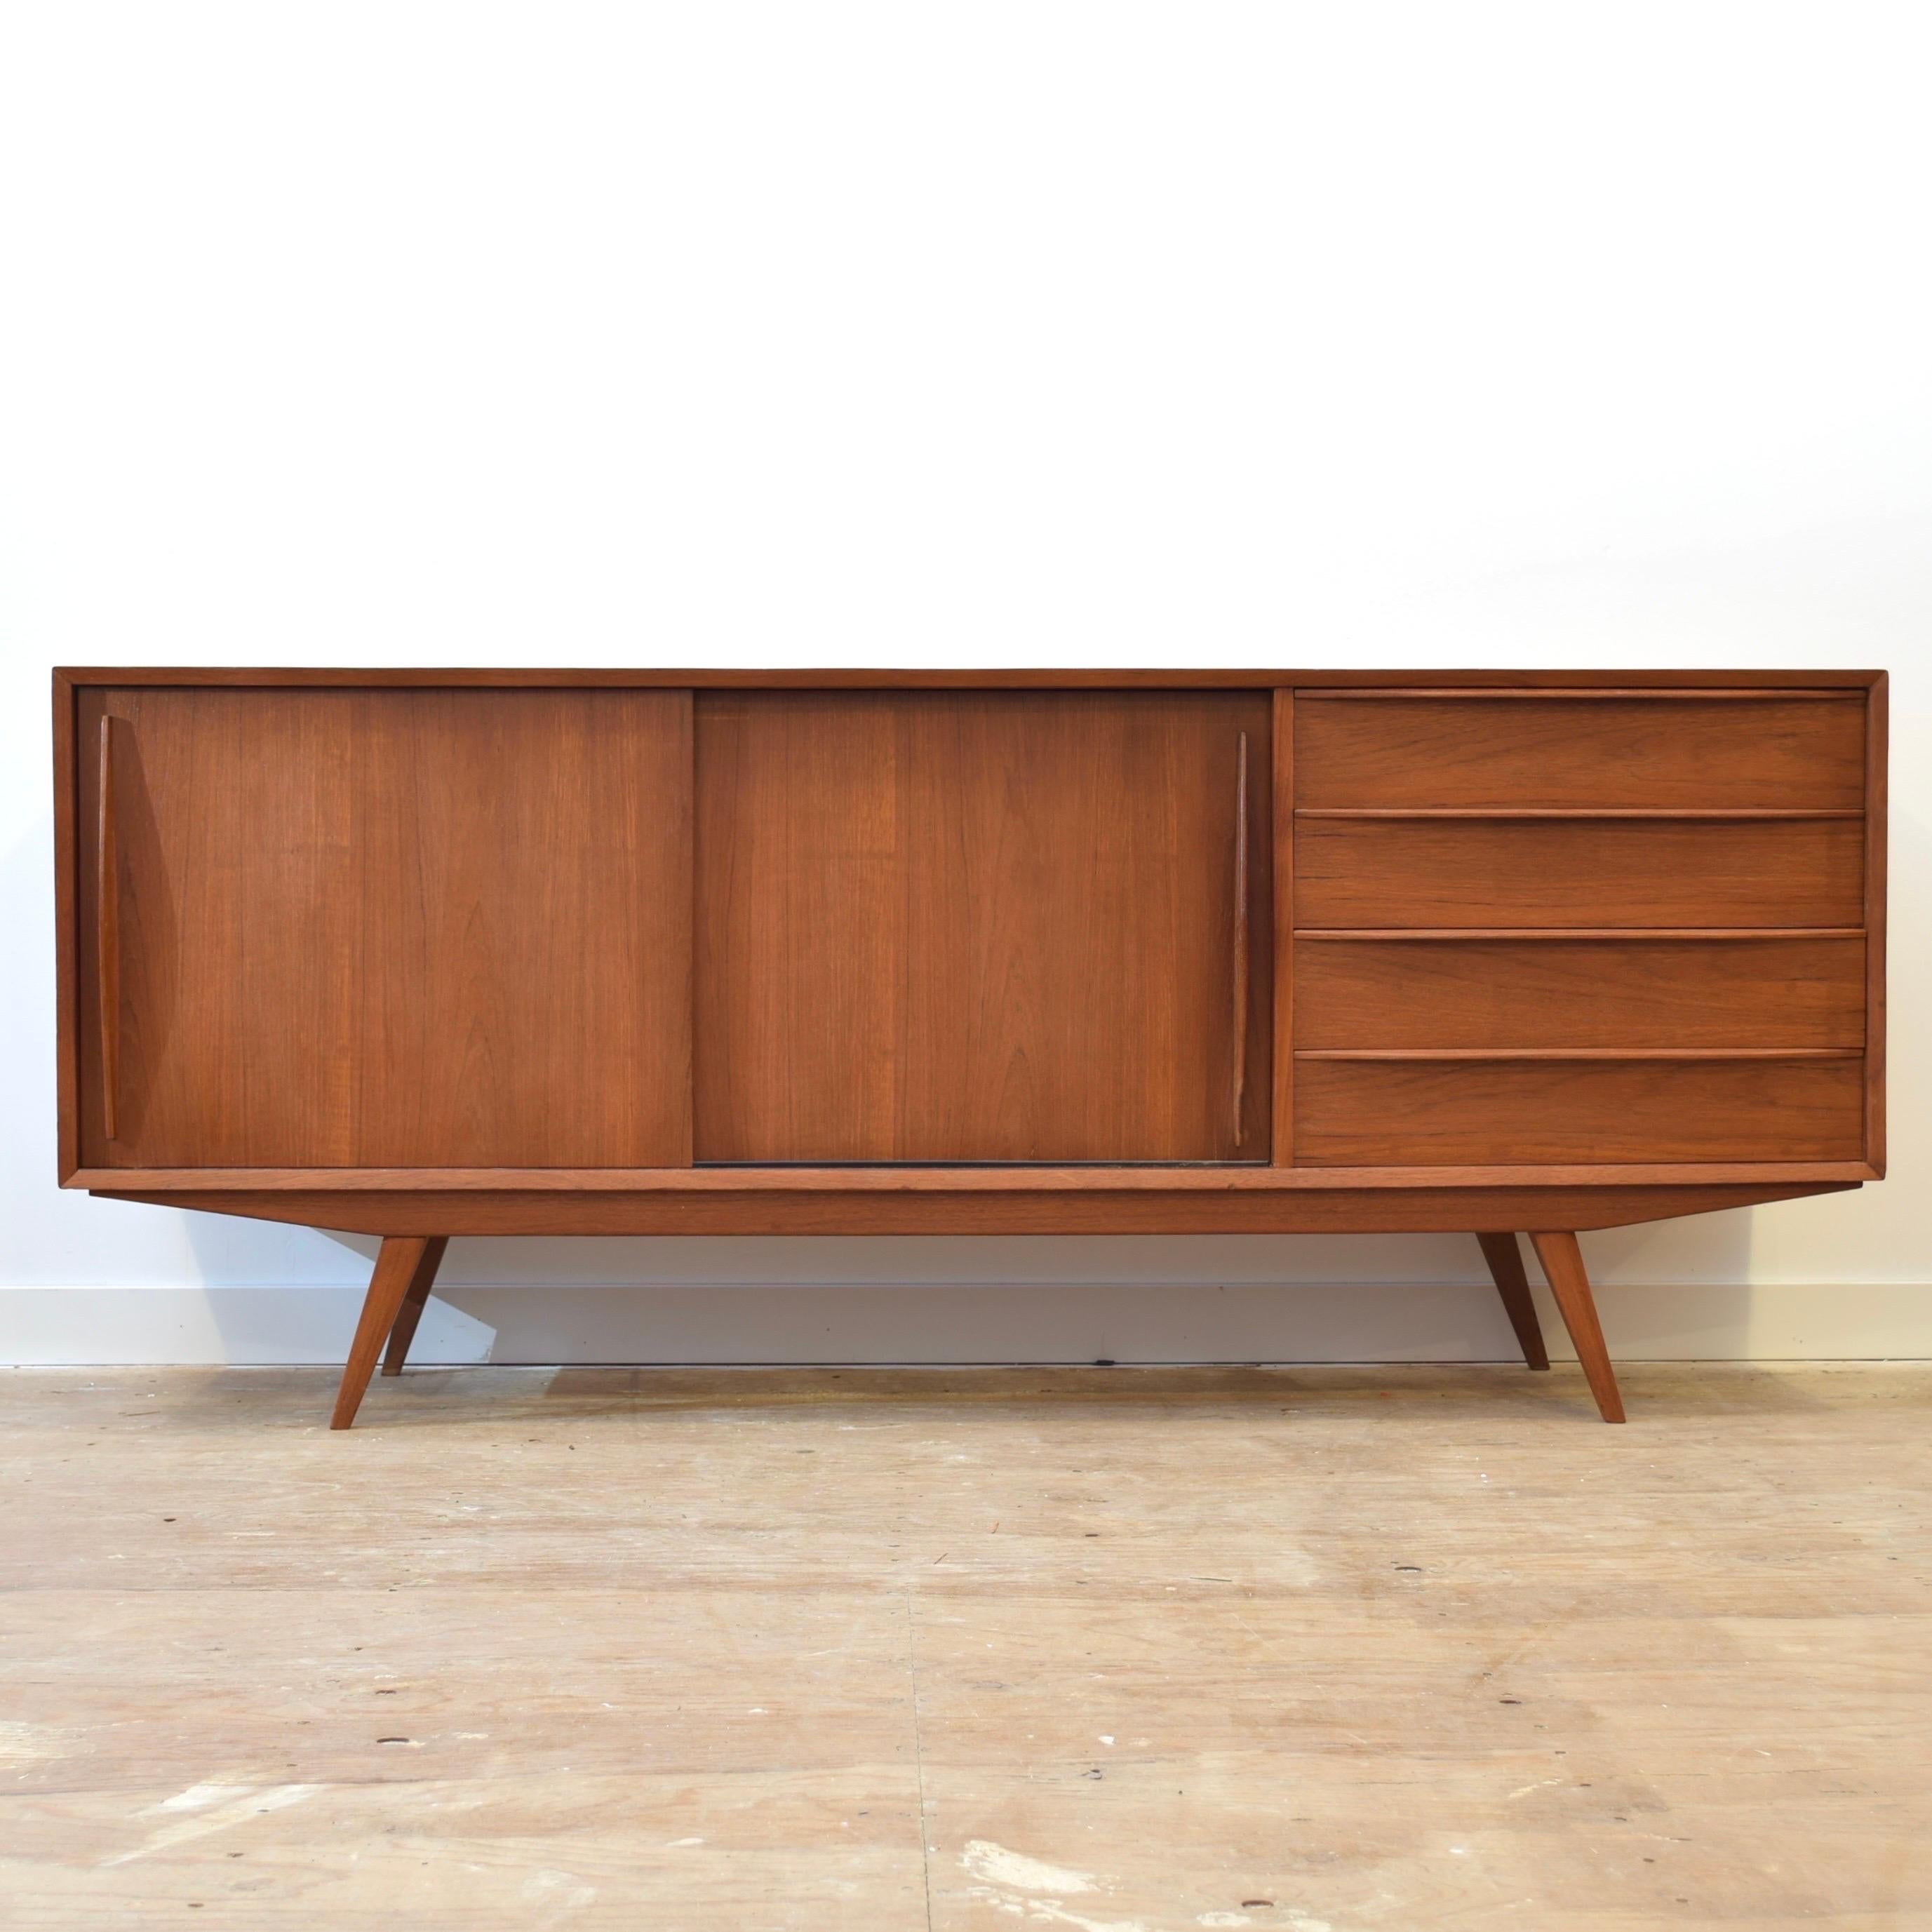 Condition: Refinished

Dimensions: 72” L x 16.5” D x 30.25” H

Description: A refinished vintage teak sideboard. Likely made in Denmark, circa 1960s. In excellent condition. One mark on surface shown in last two photos. Mark is visible in person